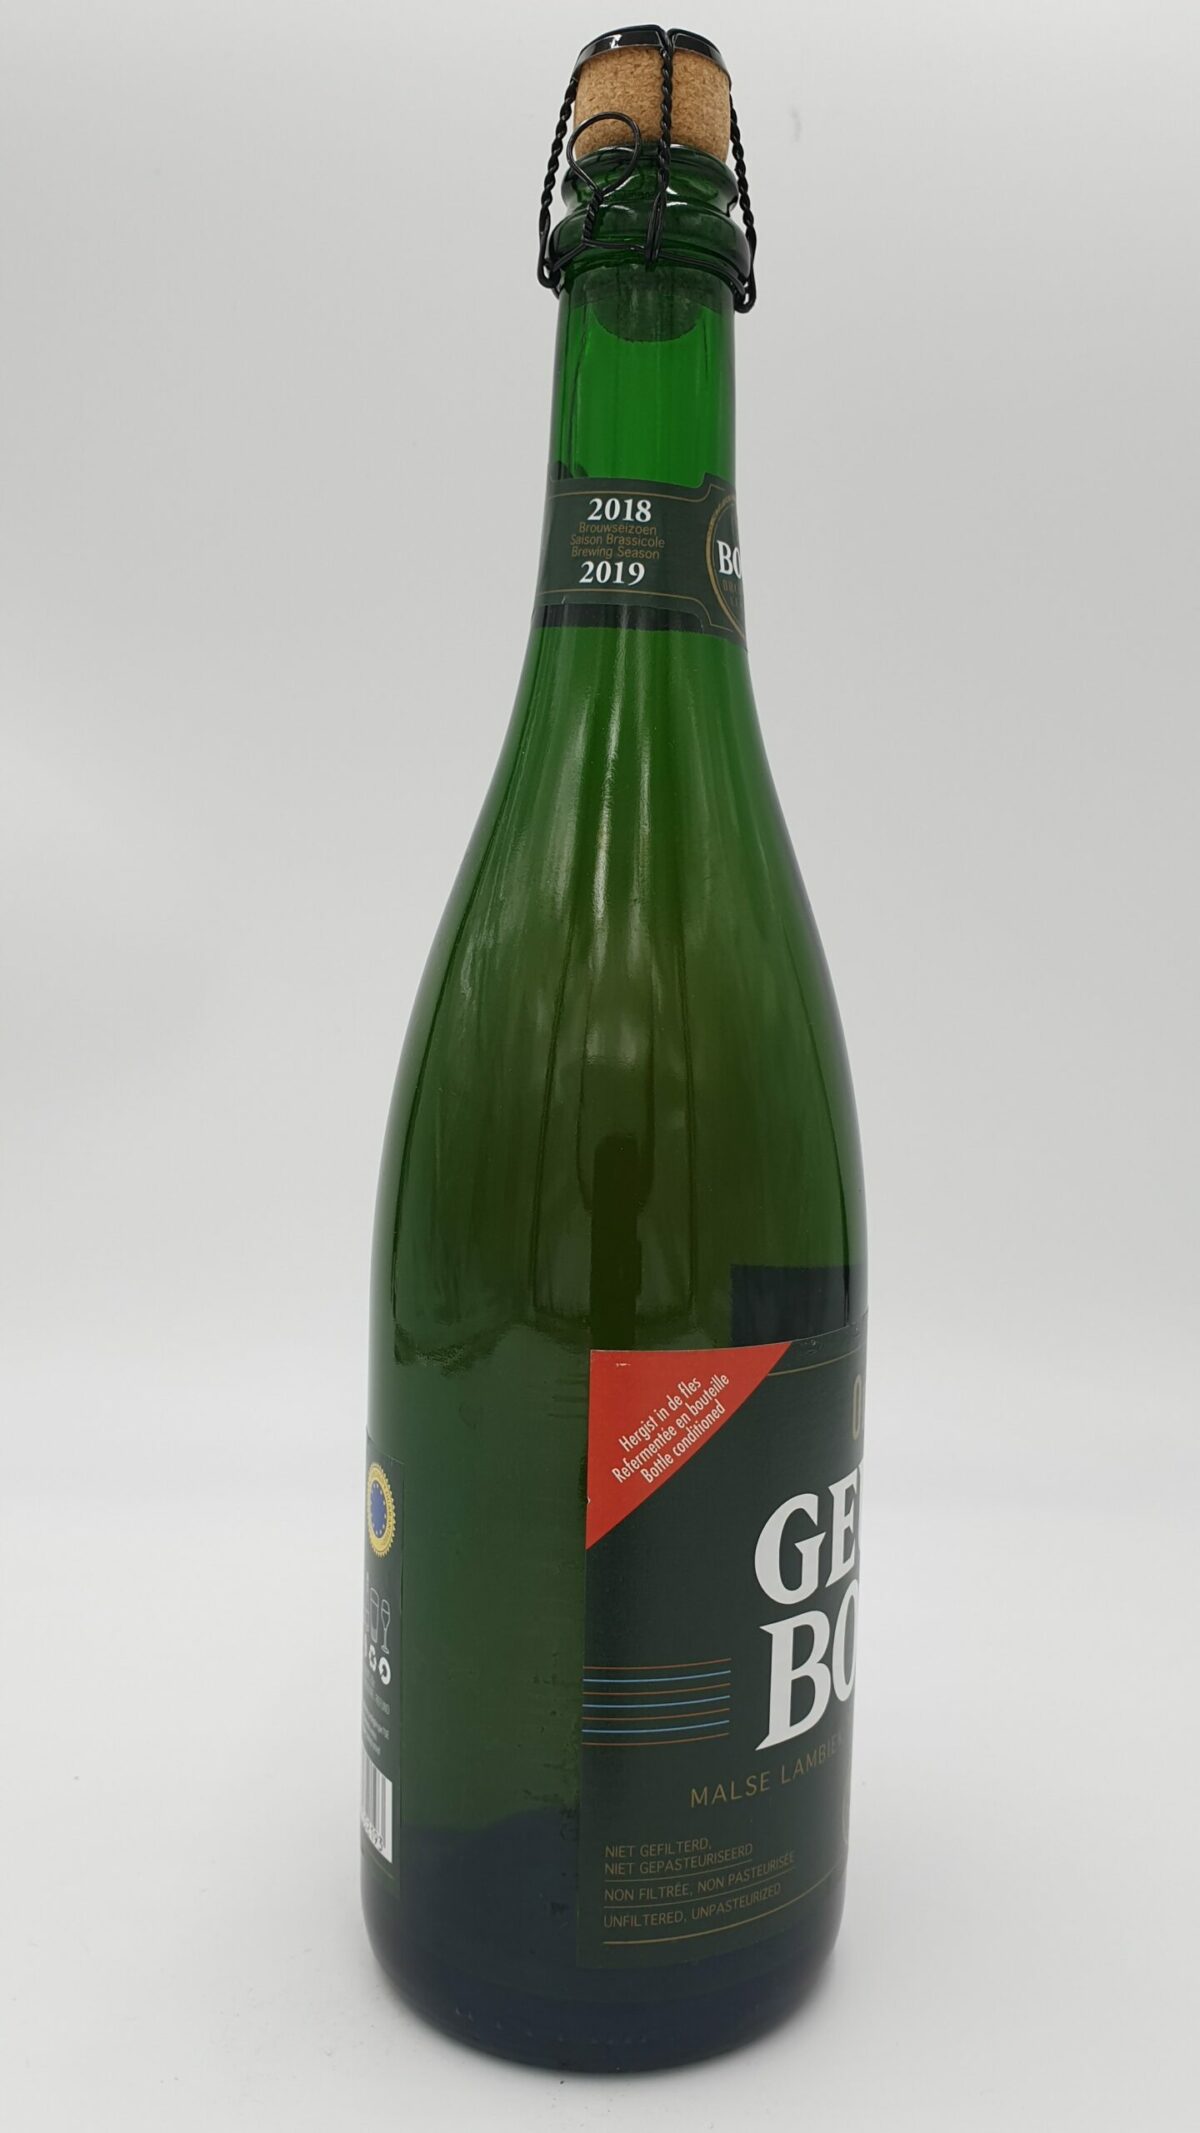 boon oude geuze new label 2018-2019